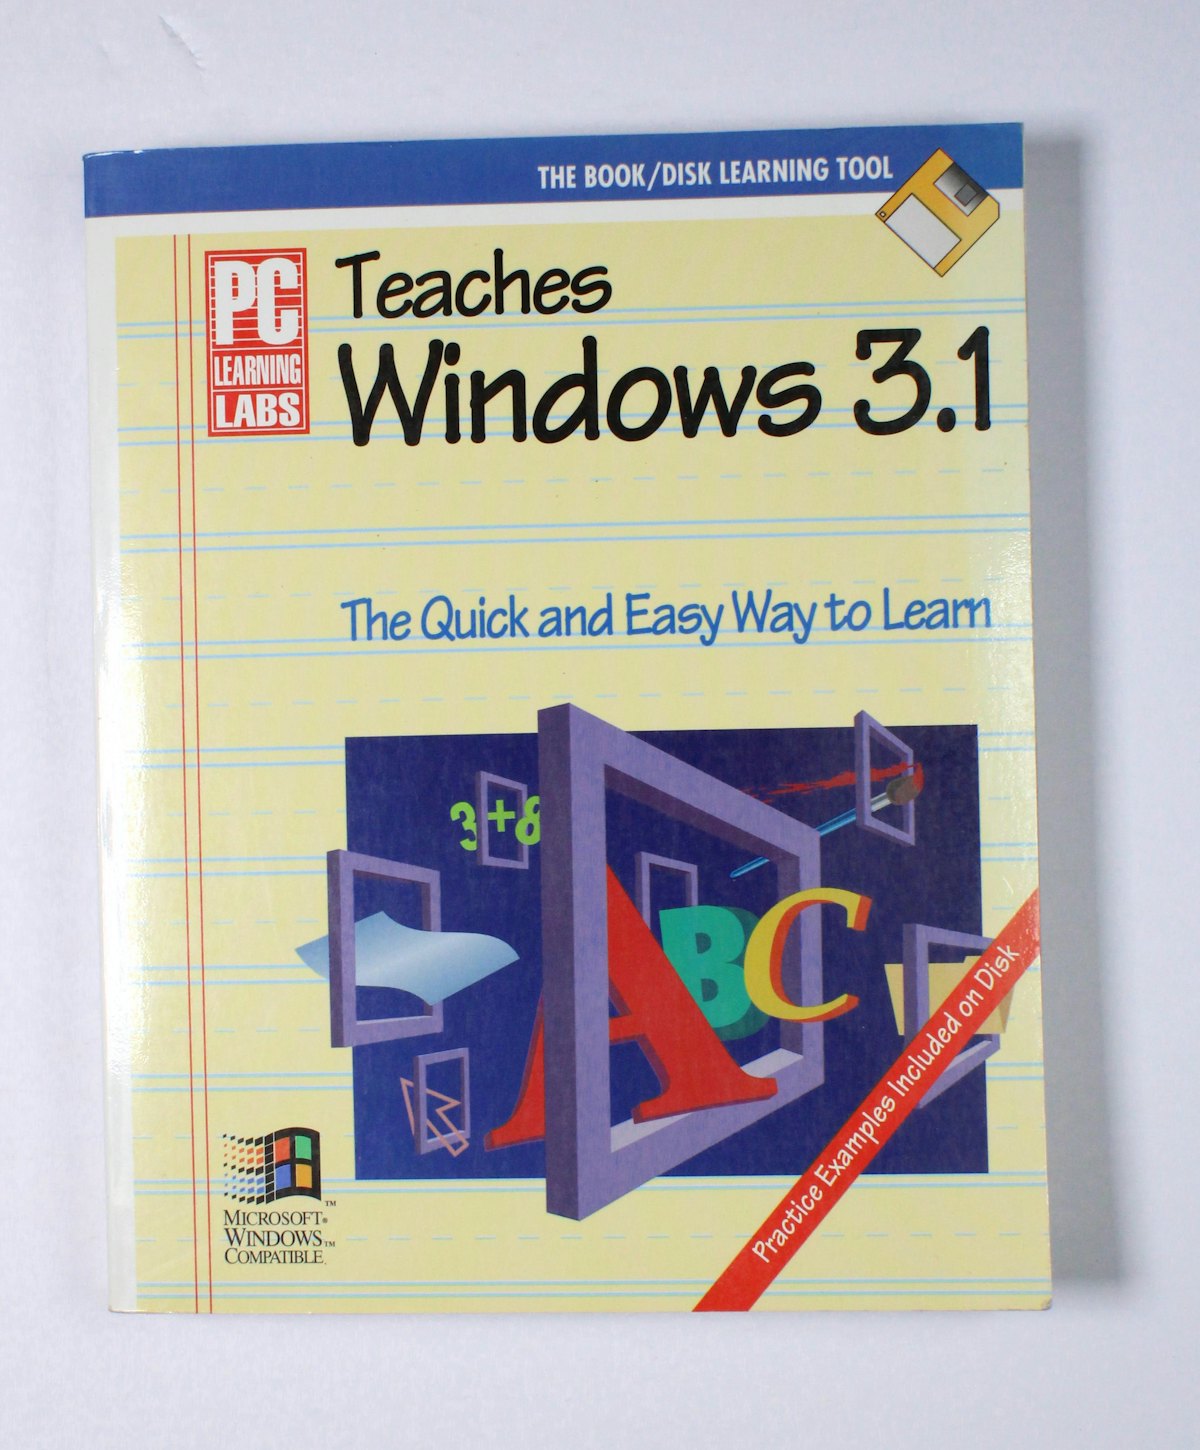 PC Learning Labs Teaches Windows 3.1